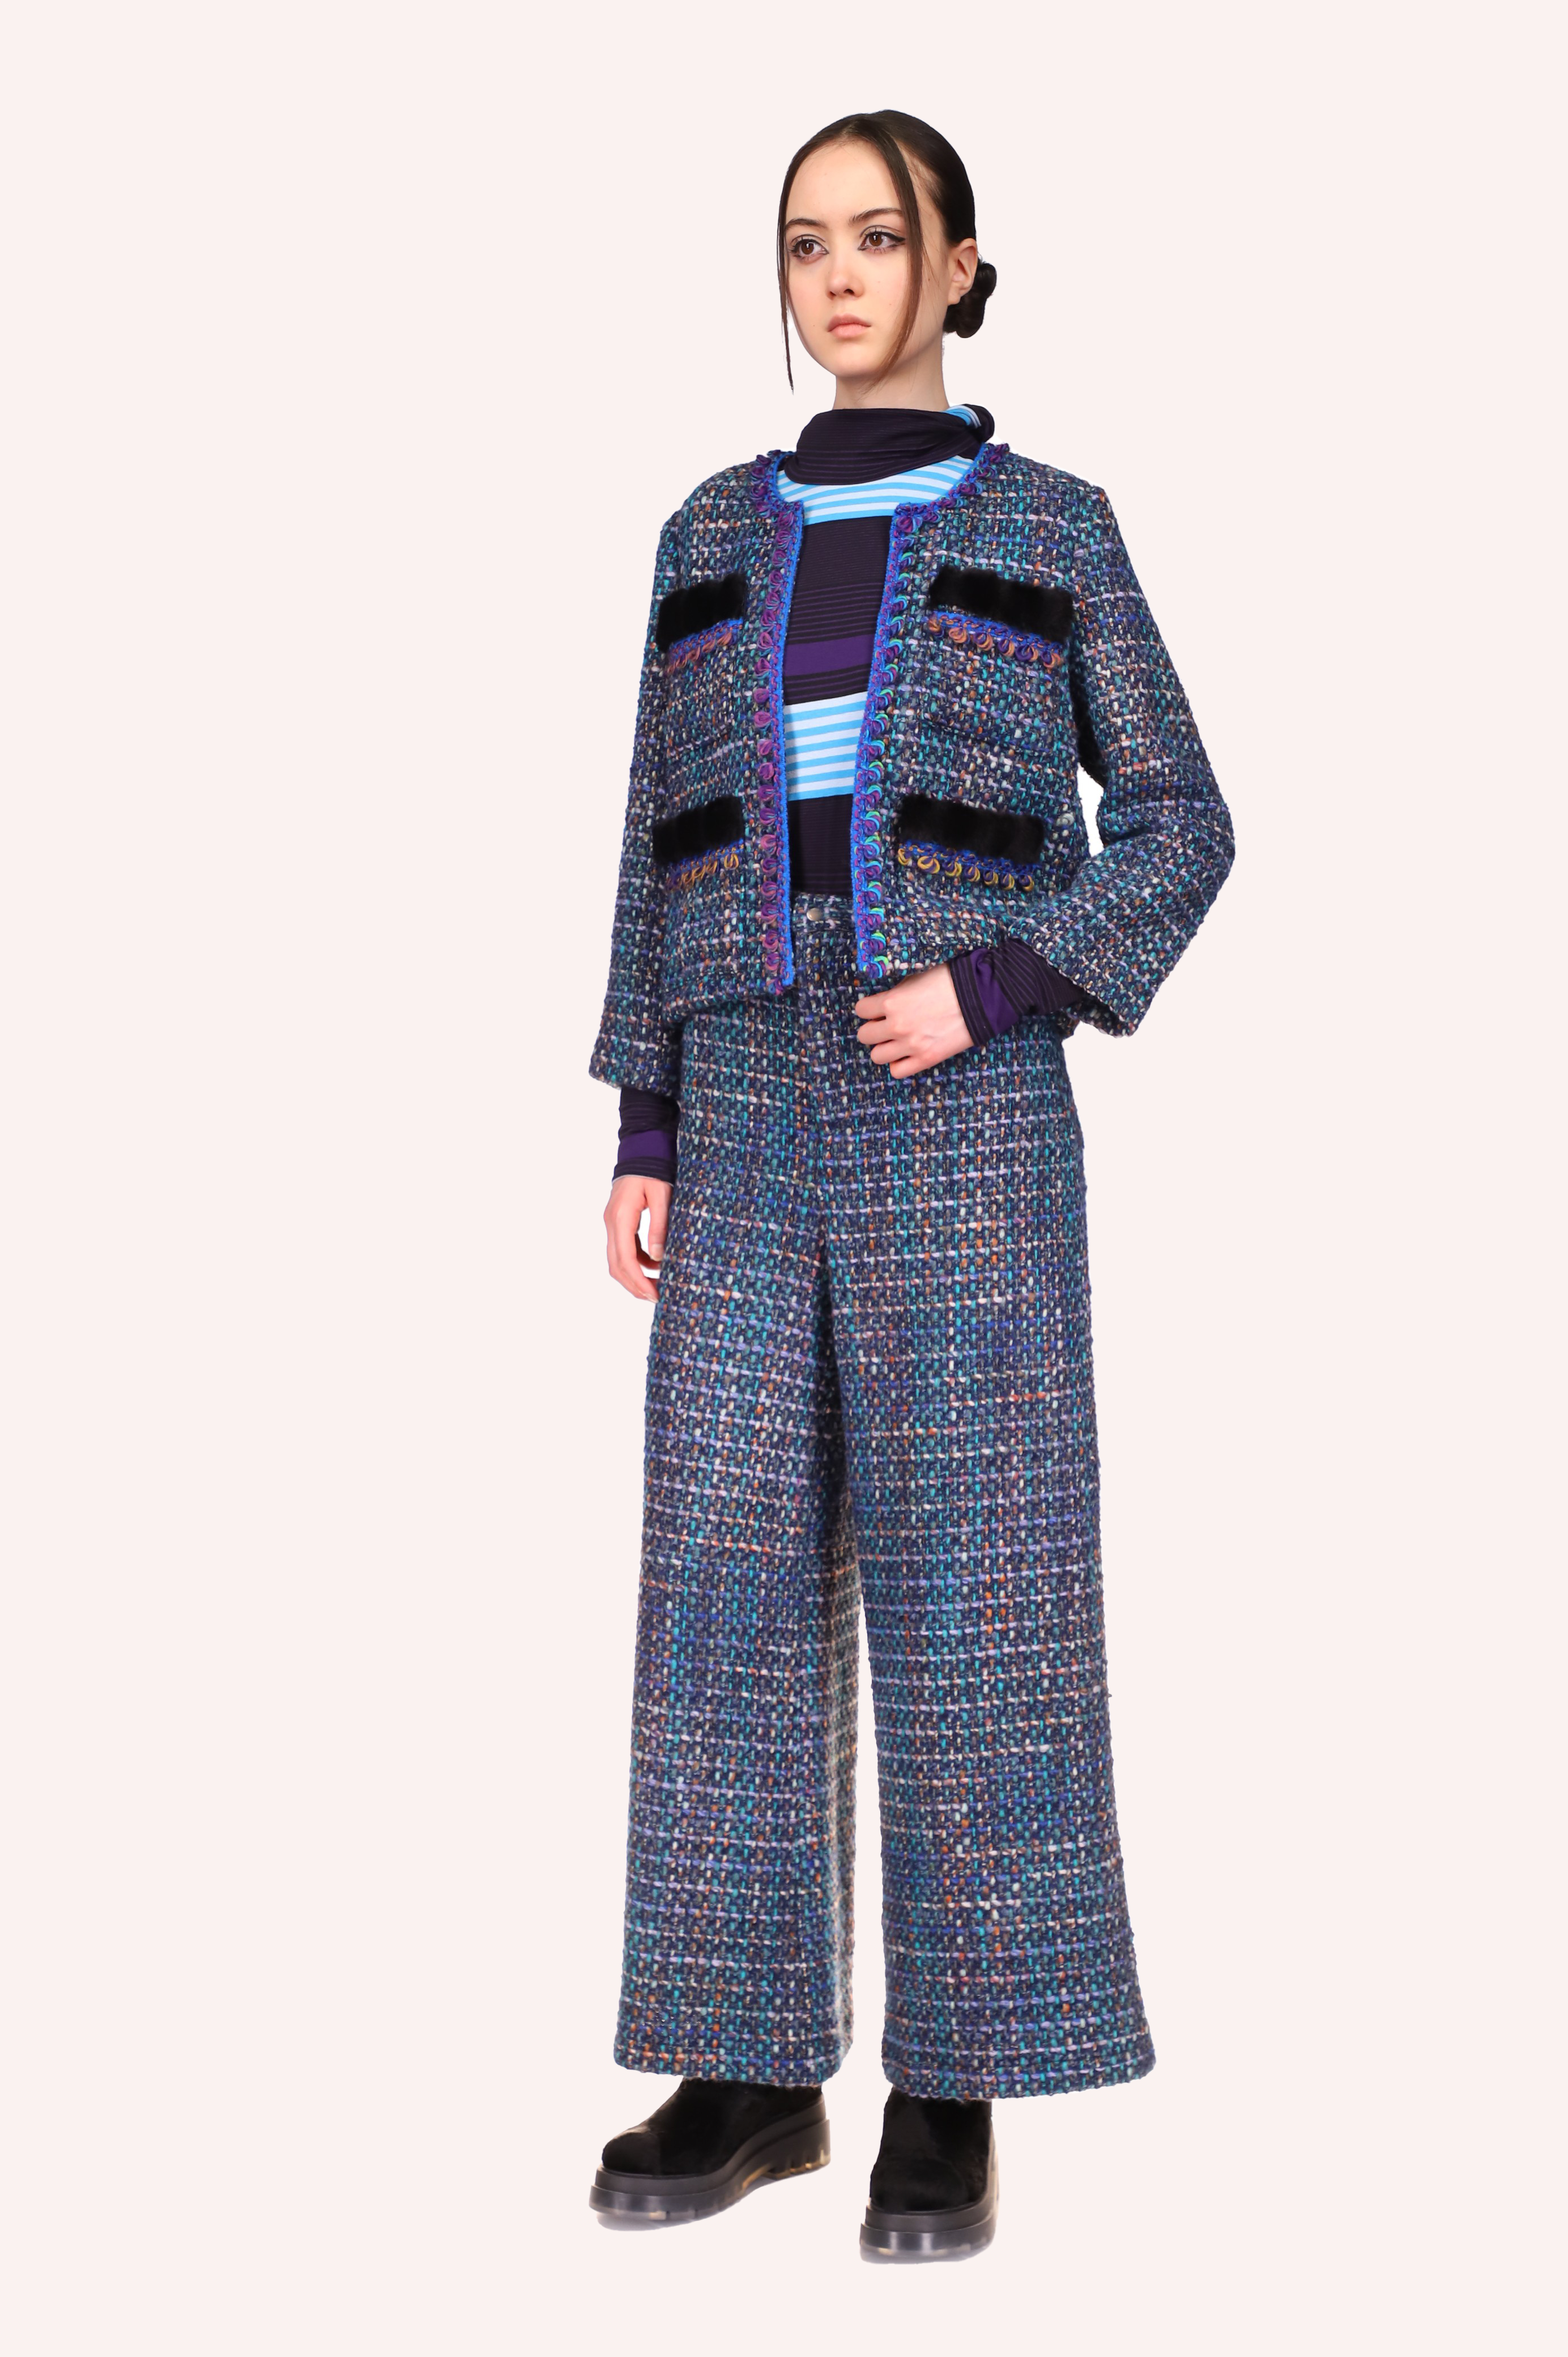 Tweed Pants Turquoise, large pants, ankles long, silver Button to close, front hidden zipper.